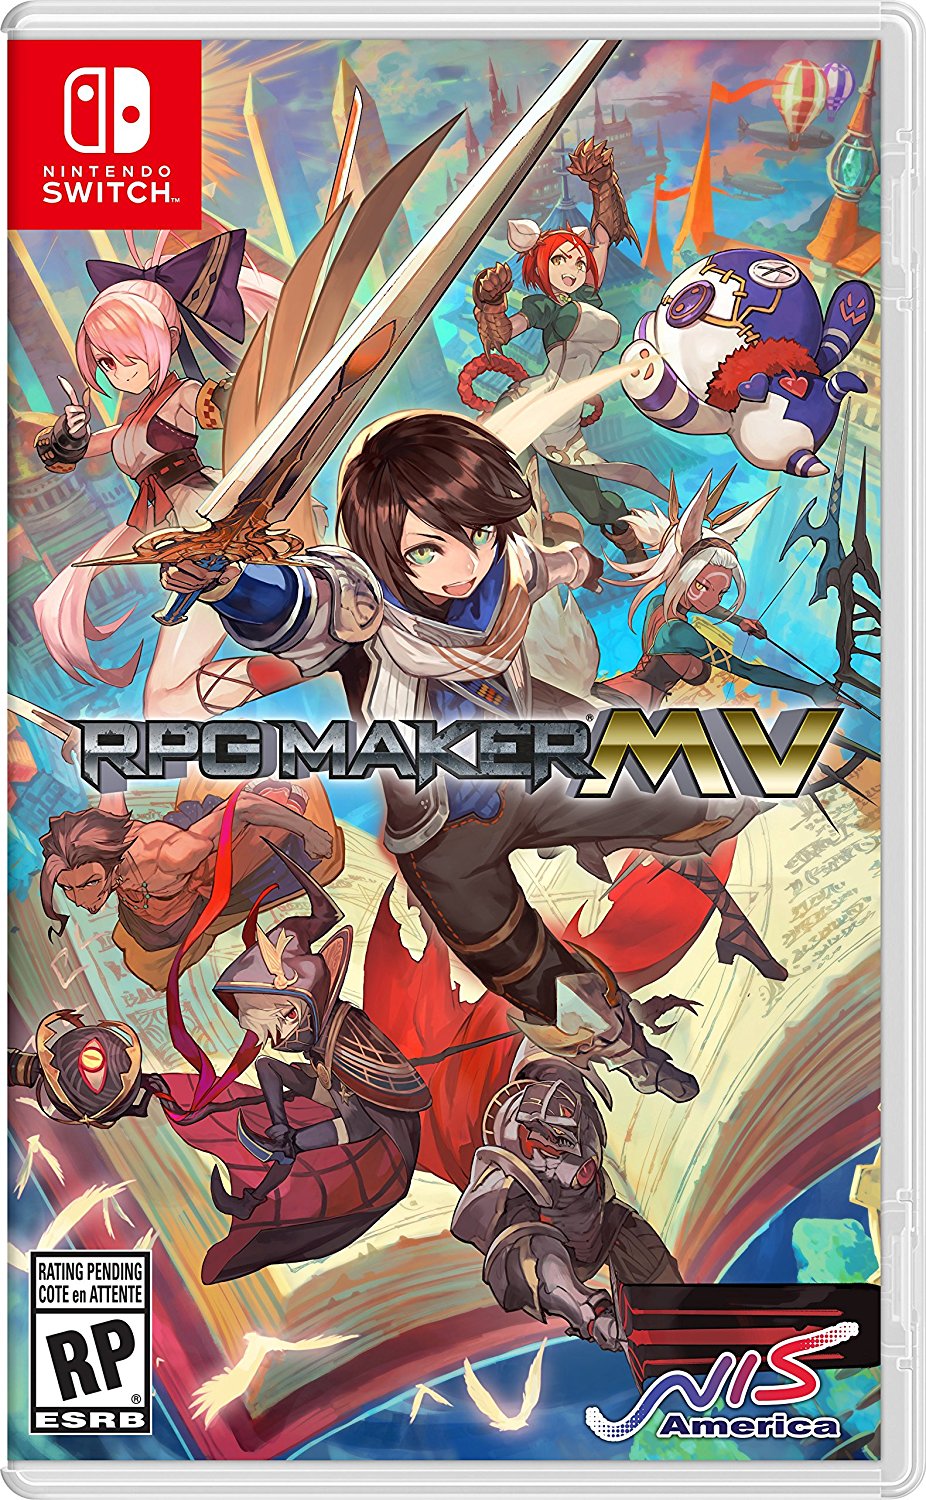 Amazon Mexico leaks RPG Maker MV for Switch